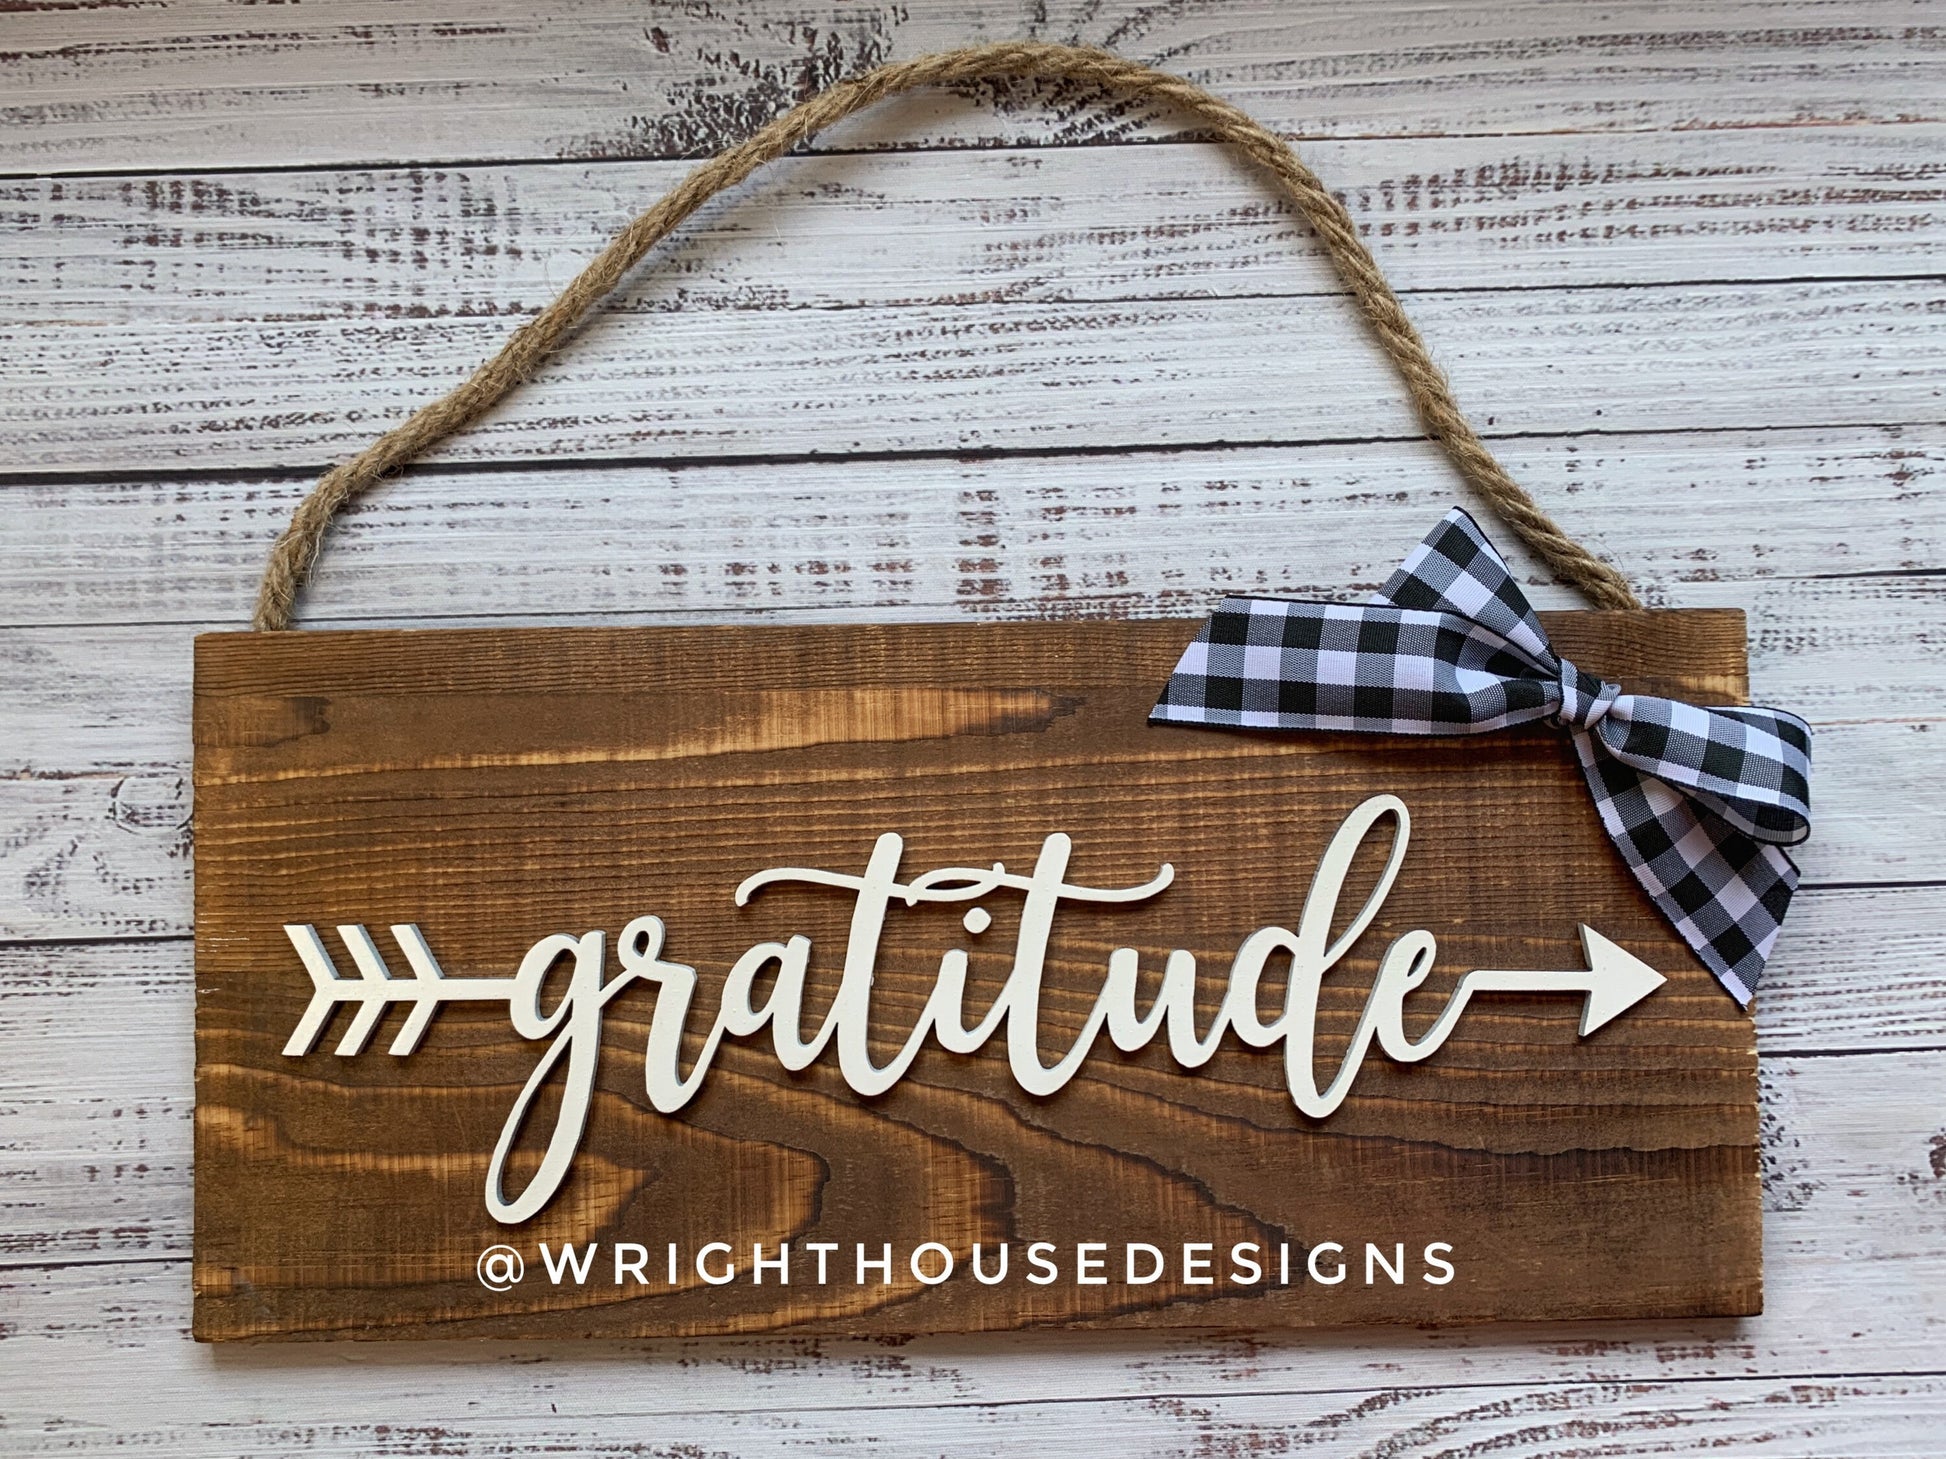 Gratitude - Arrow Word Art - Rustic Farmhouse - Reclaimed Pallet Plank Board Sign - Wooden Wall Art - Bookshelf Decor and She Shed Signs